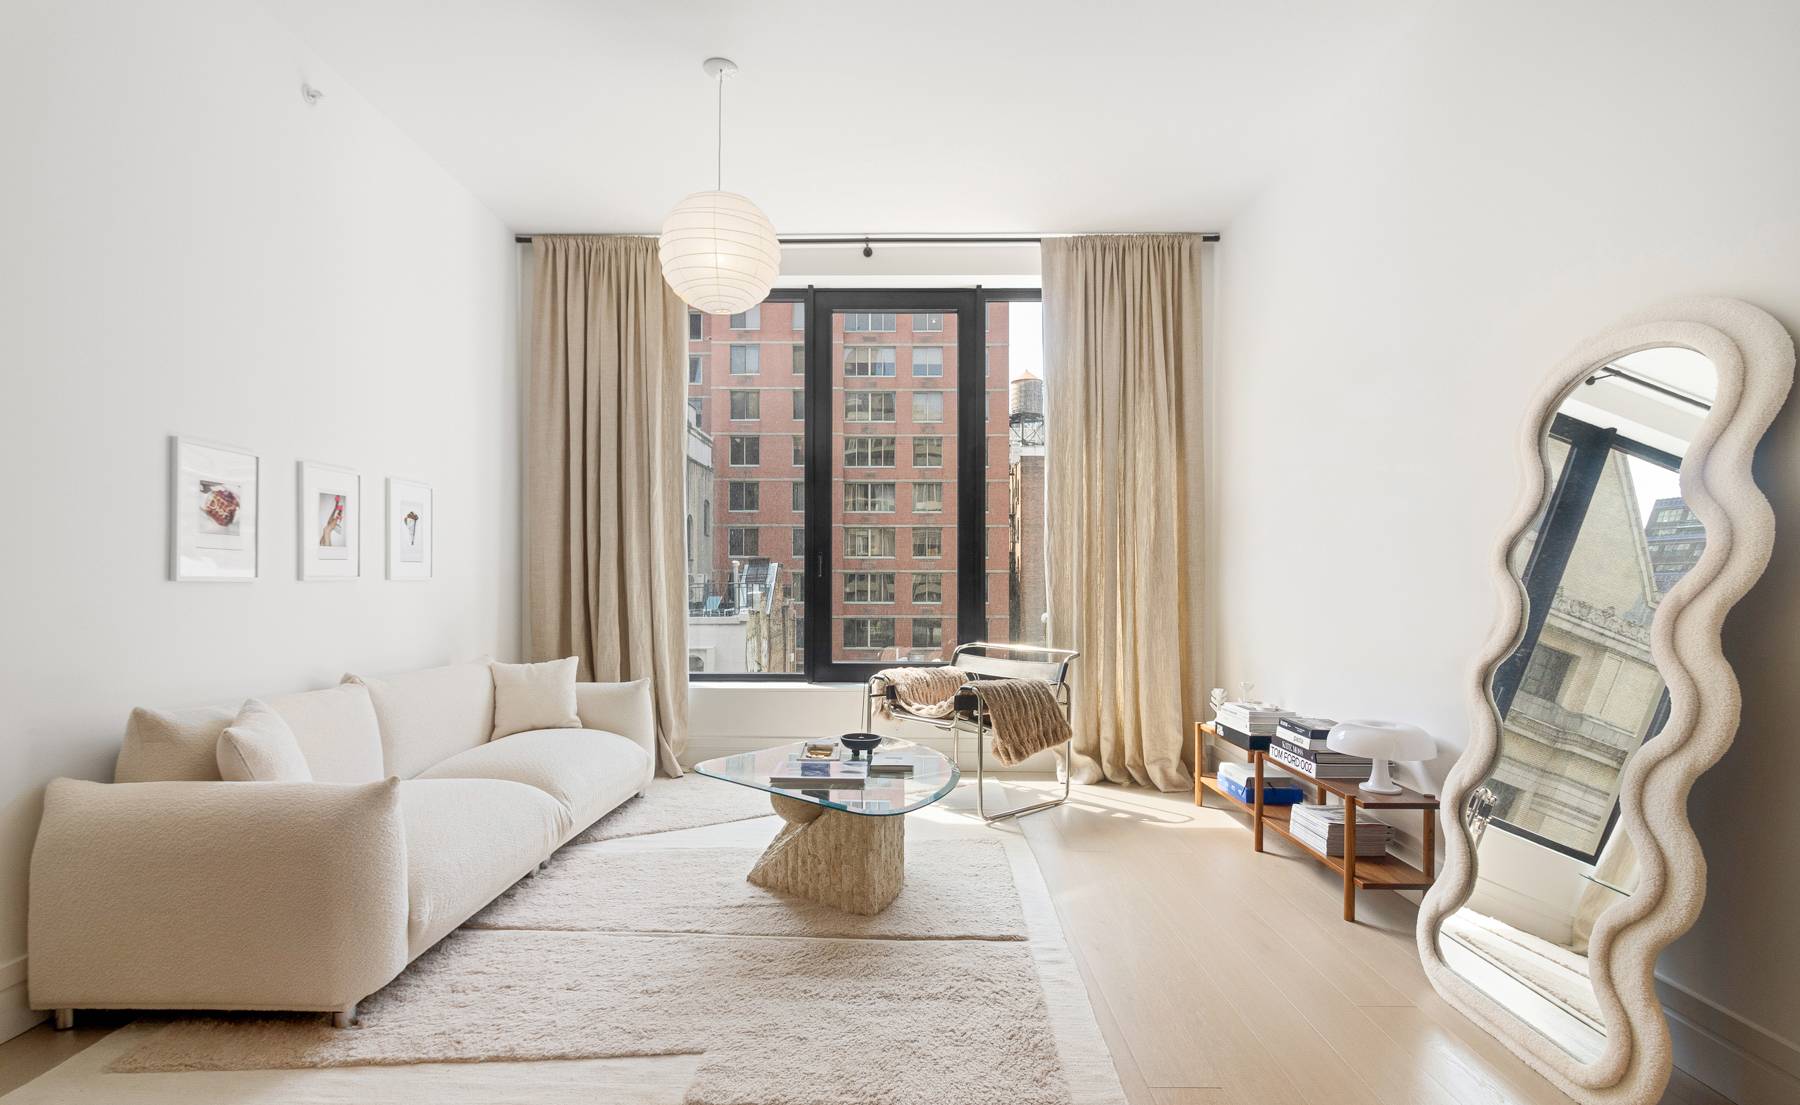 Step into this bright and modern one bedroom oasis, where the stunning views of the iconic Empire State Building will take your breath away.